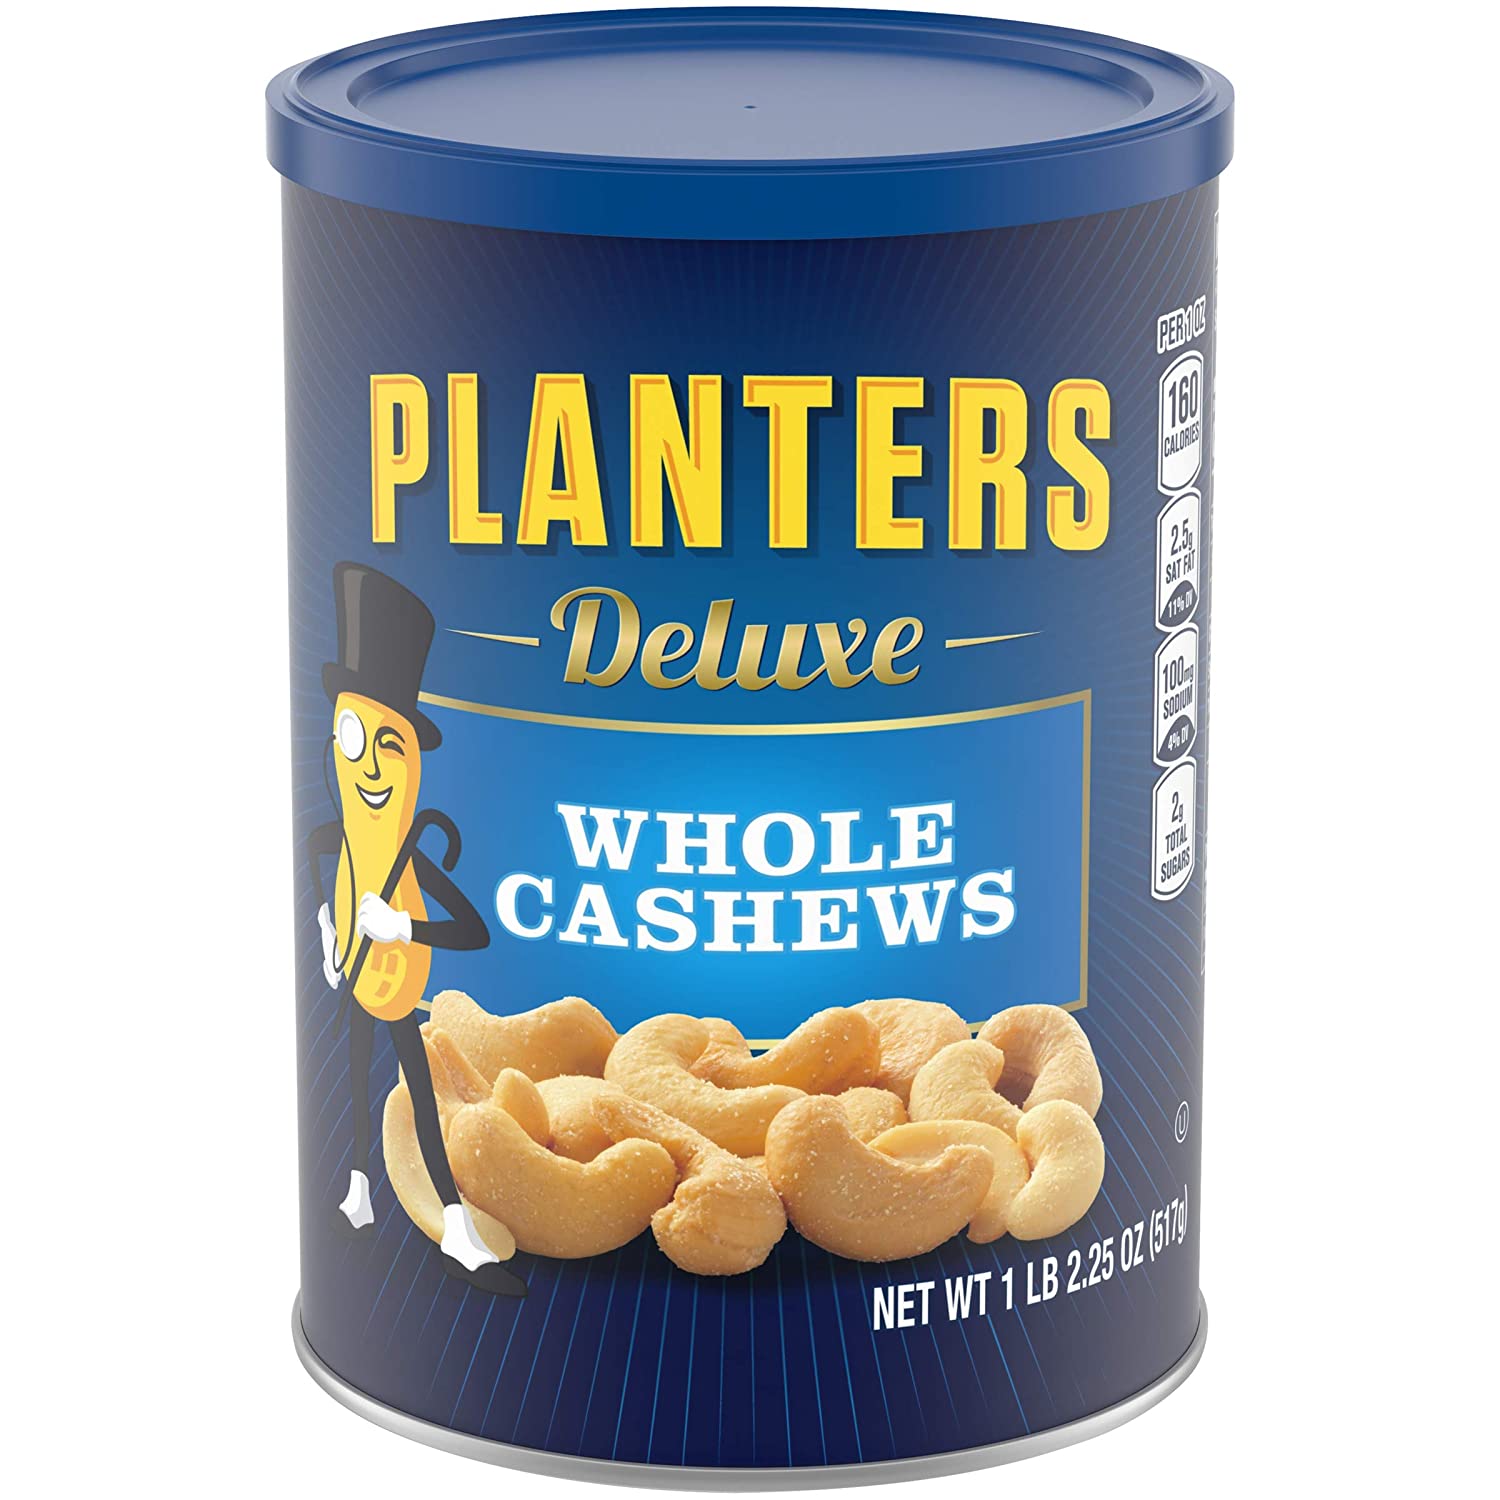 18.25-Oz PLANTERS Deluxe Whole Cashews $4.67 or less w/ S&S at Amazon